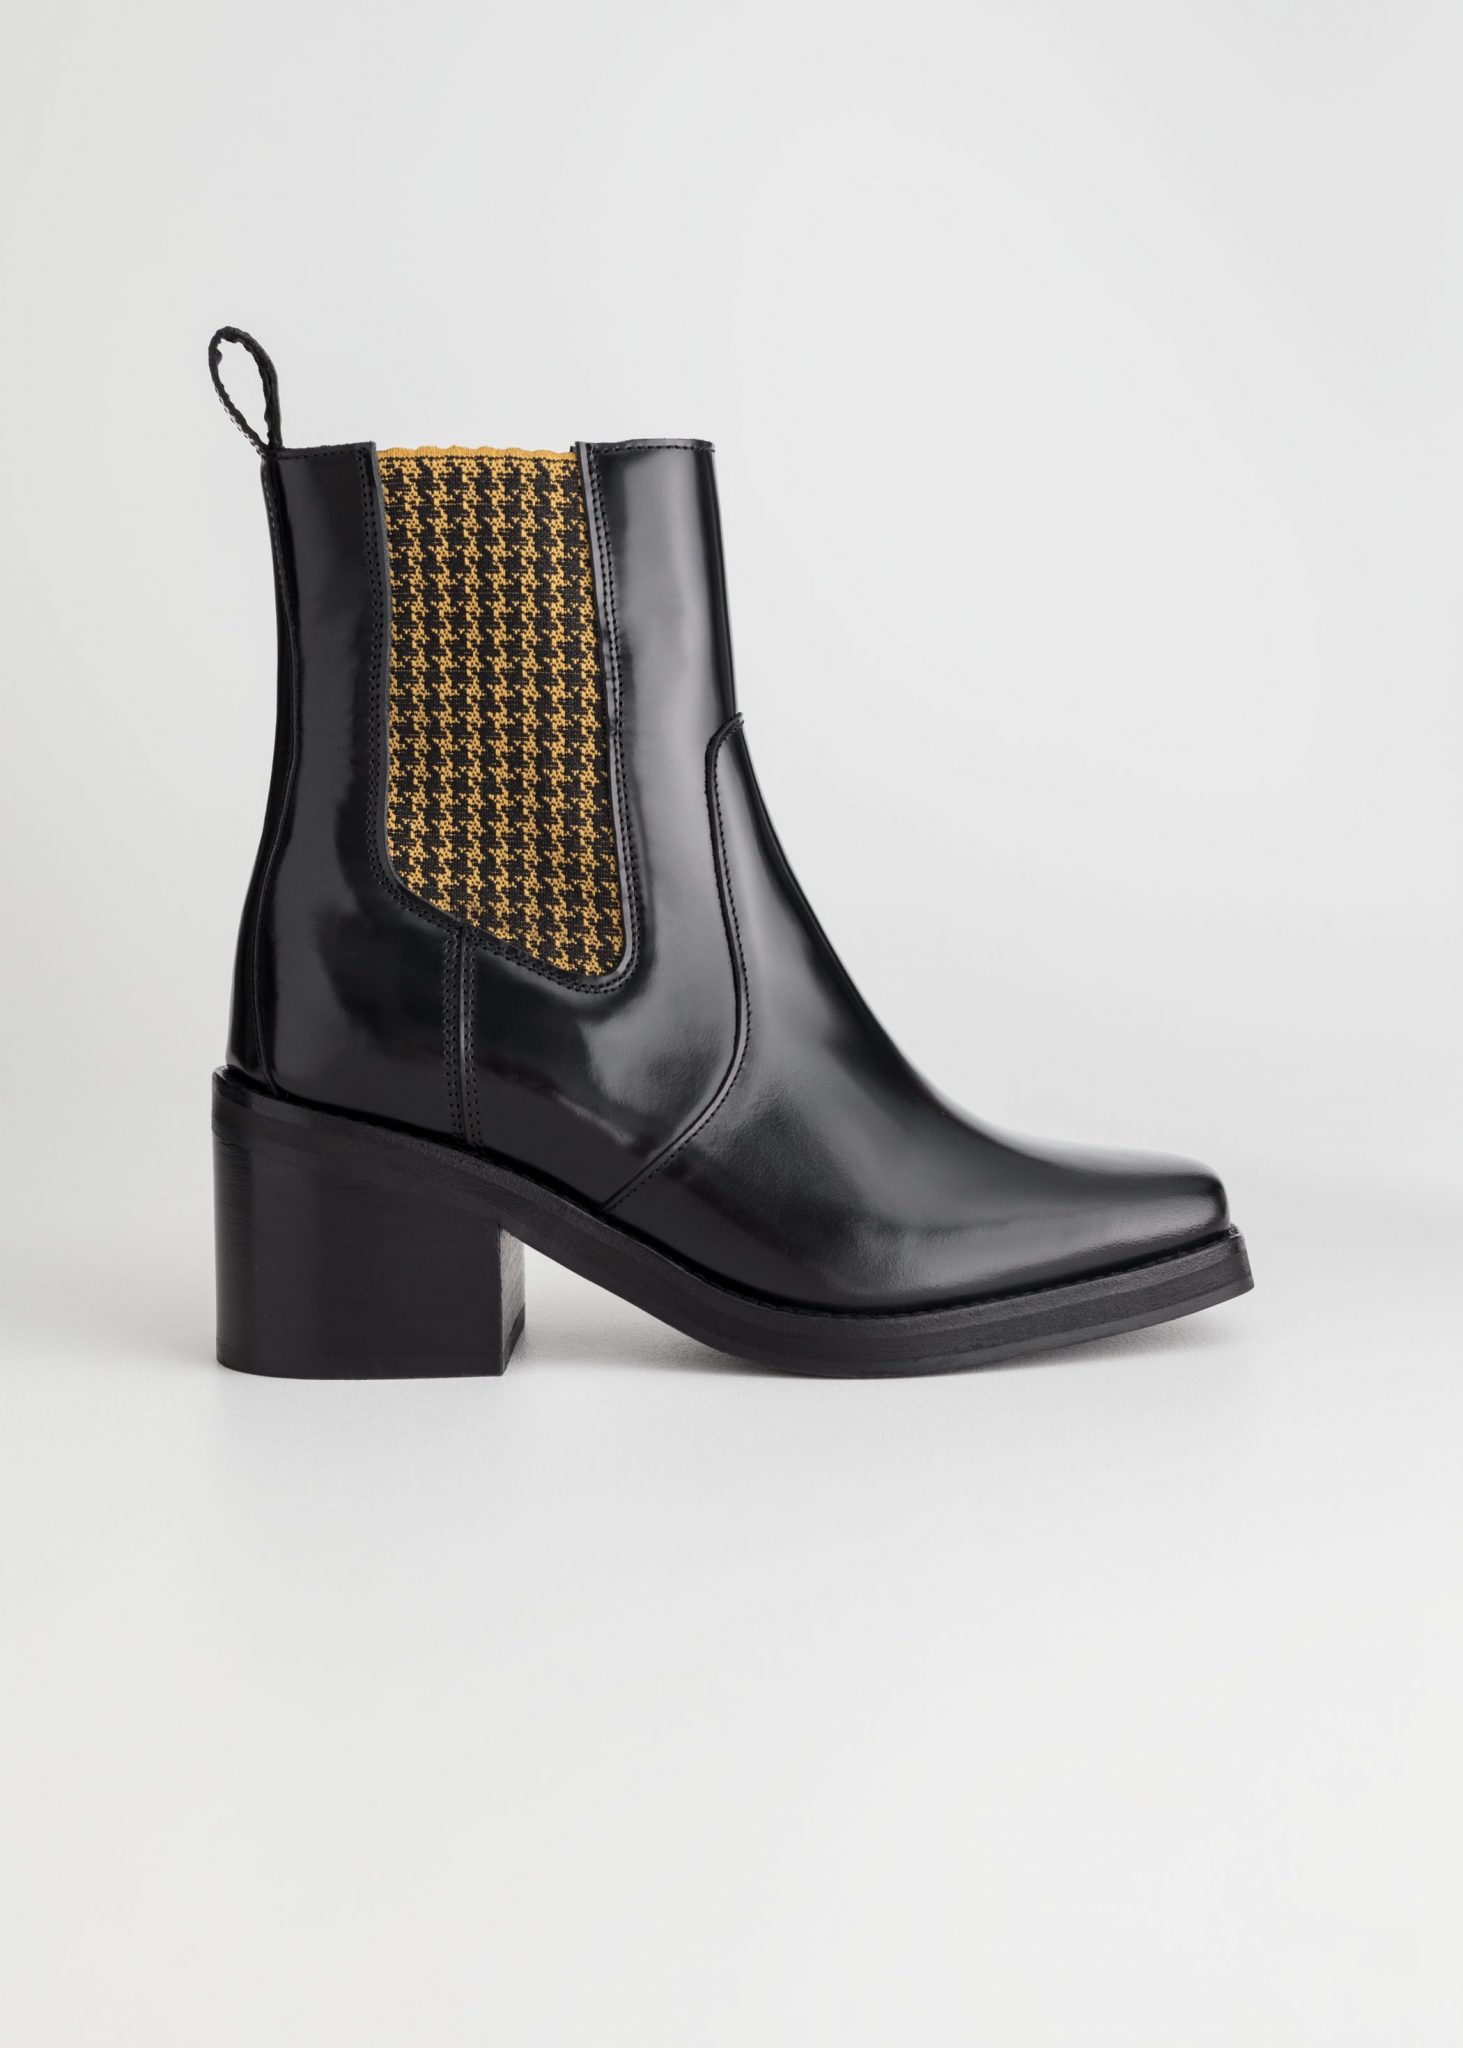 15 square-toe boots to add to your closet this winter